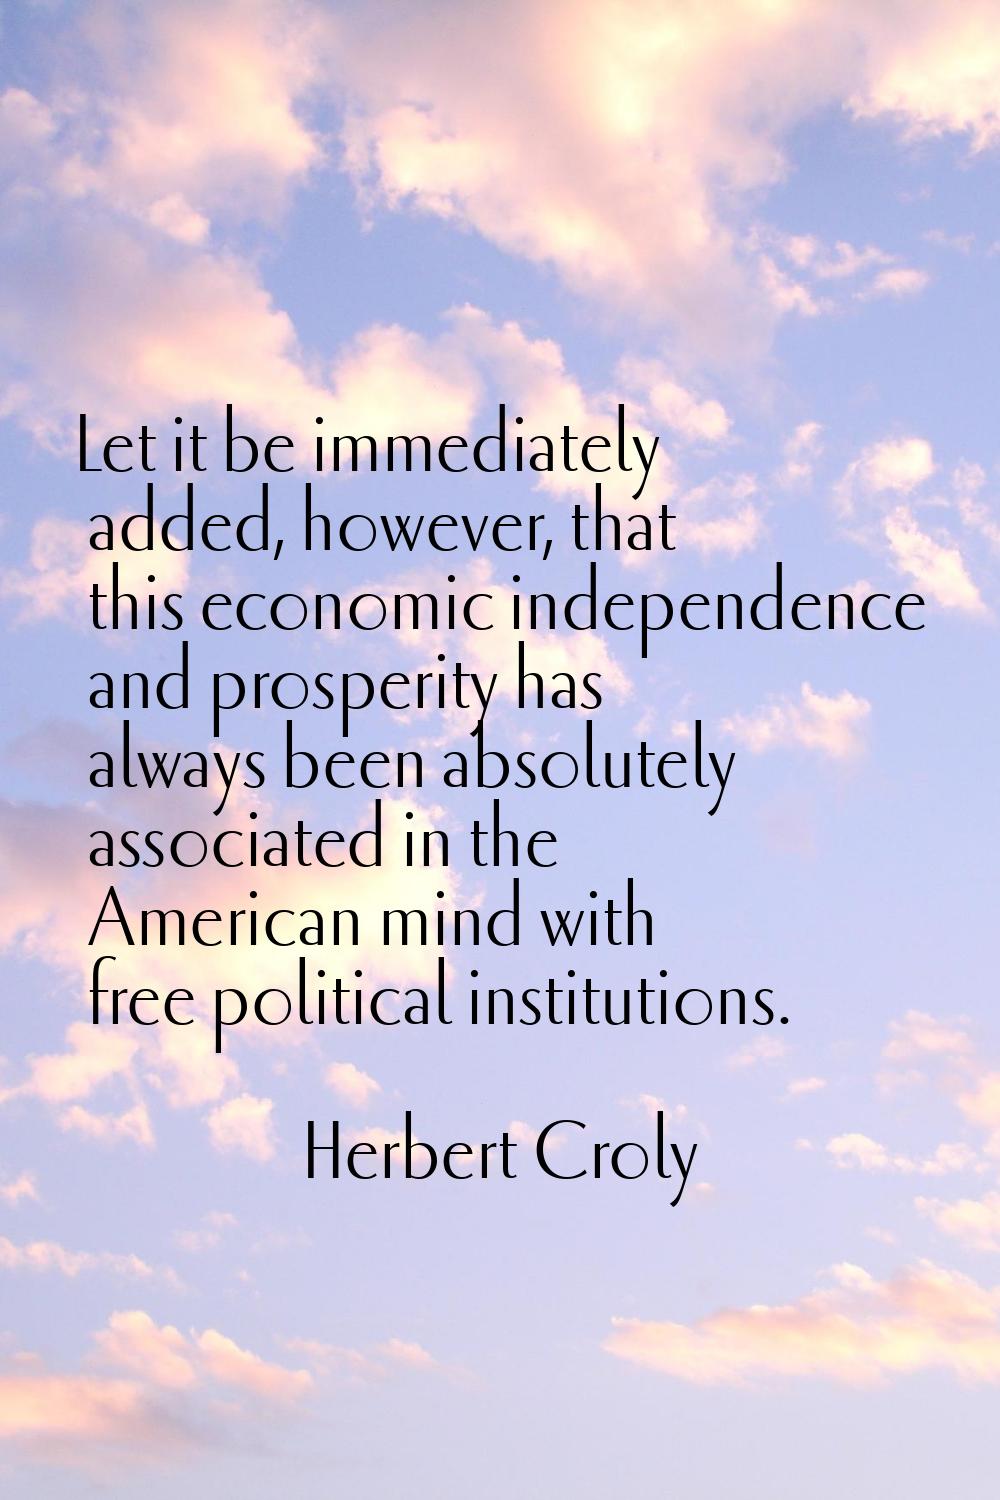 Let it be immediately added, however, that this economic independence and prosperity has always bee